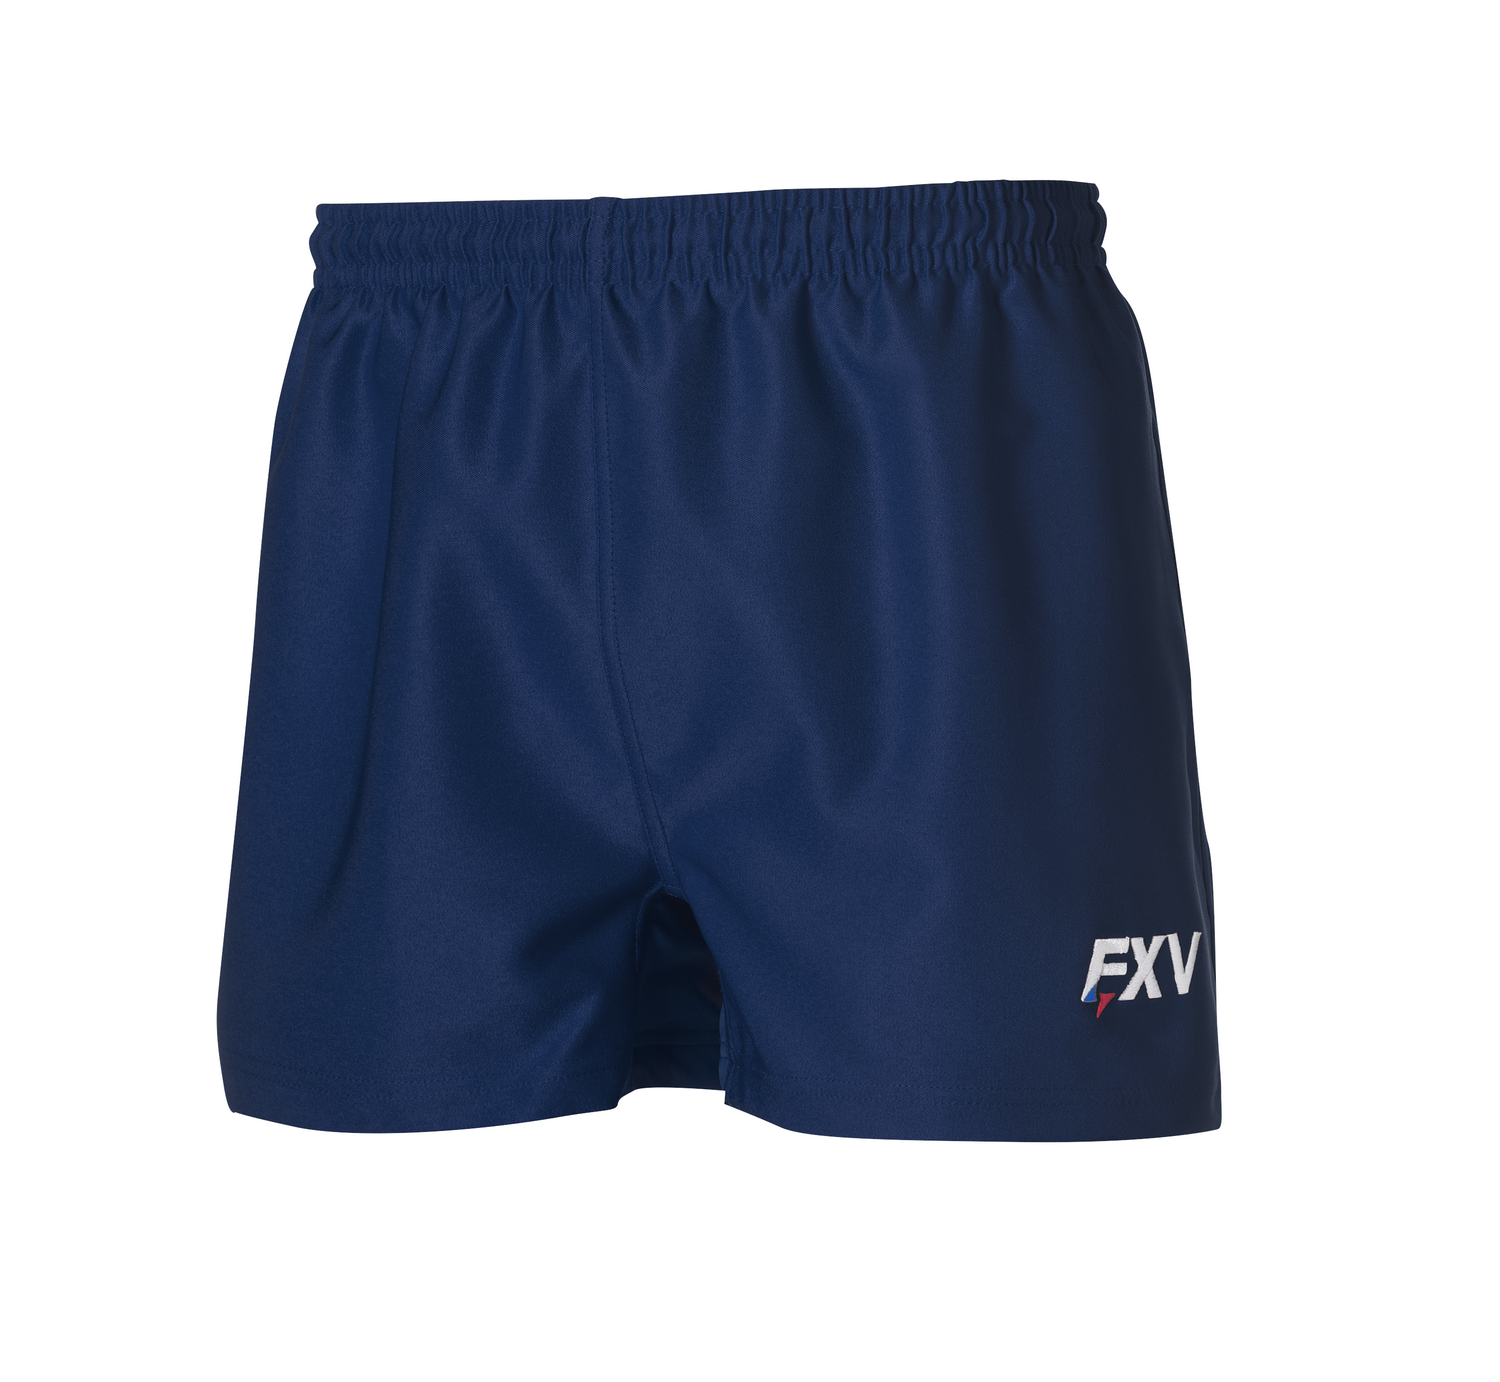 Short de rugby Force XV FORCE 2 marine